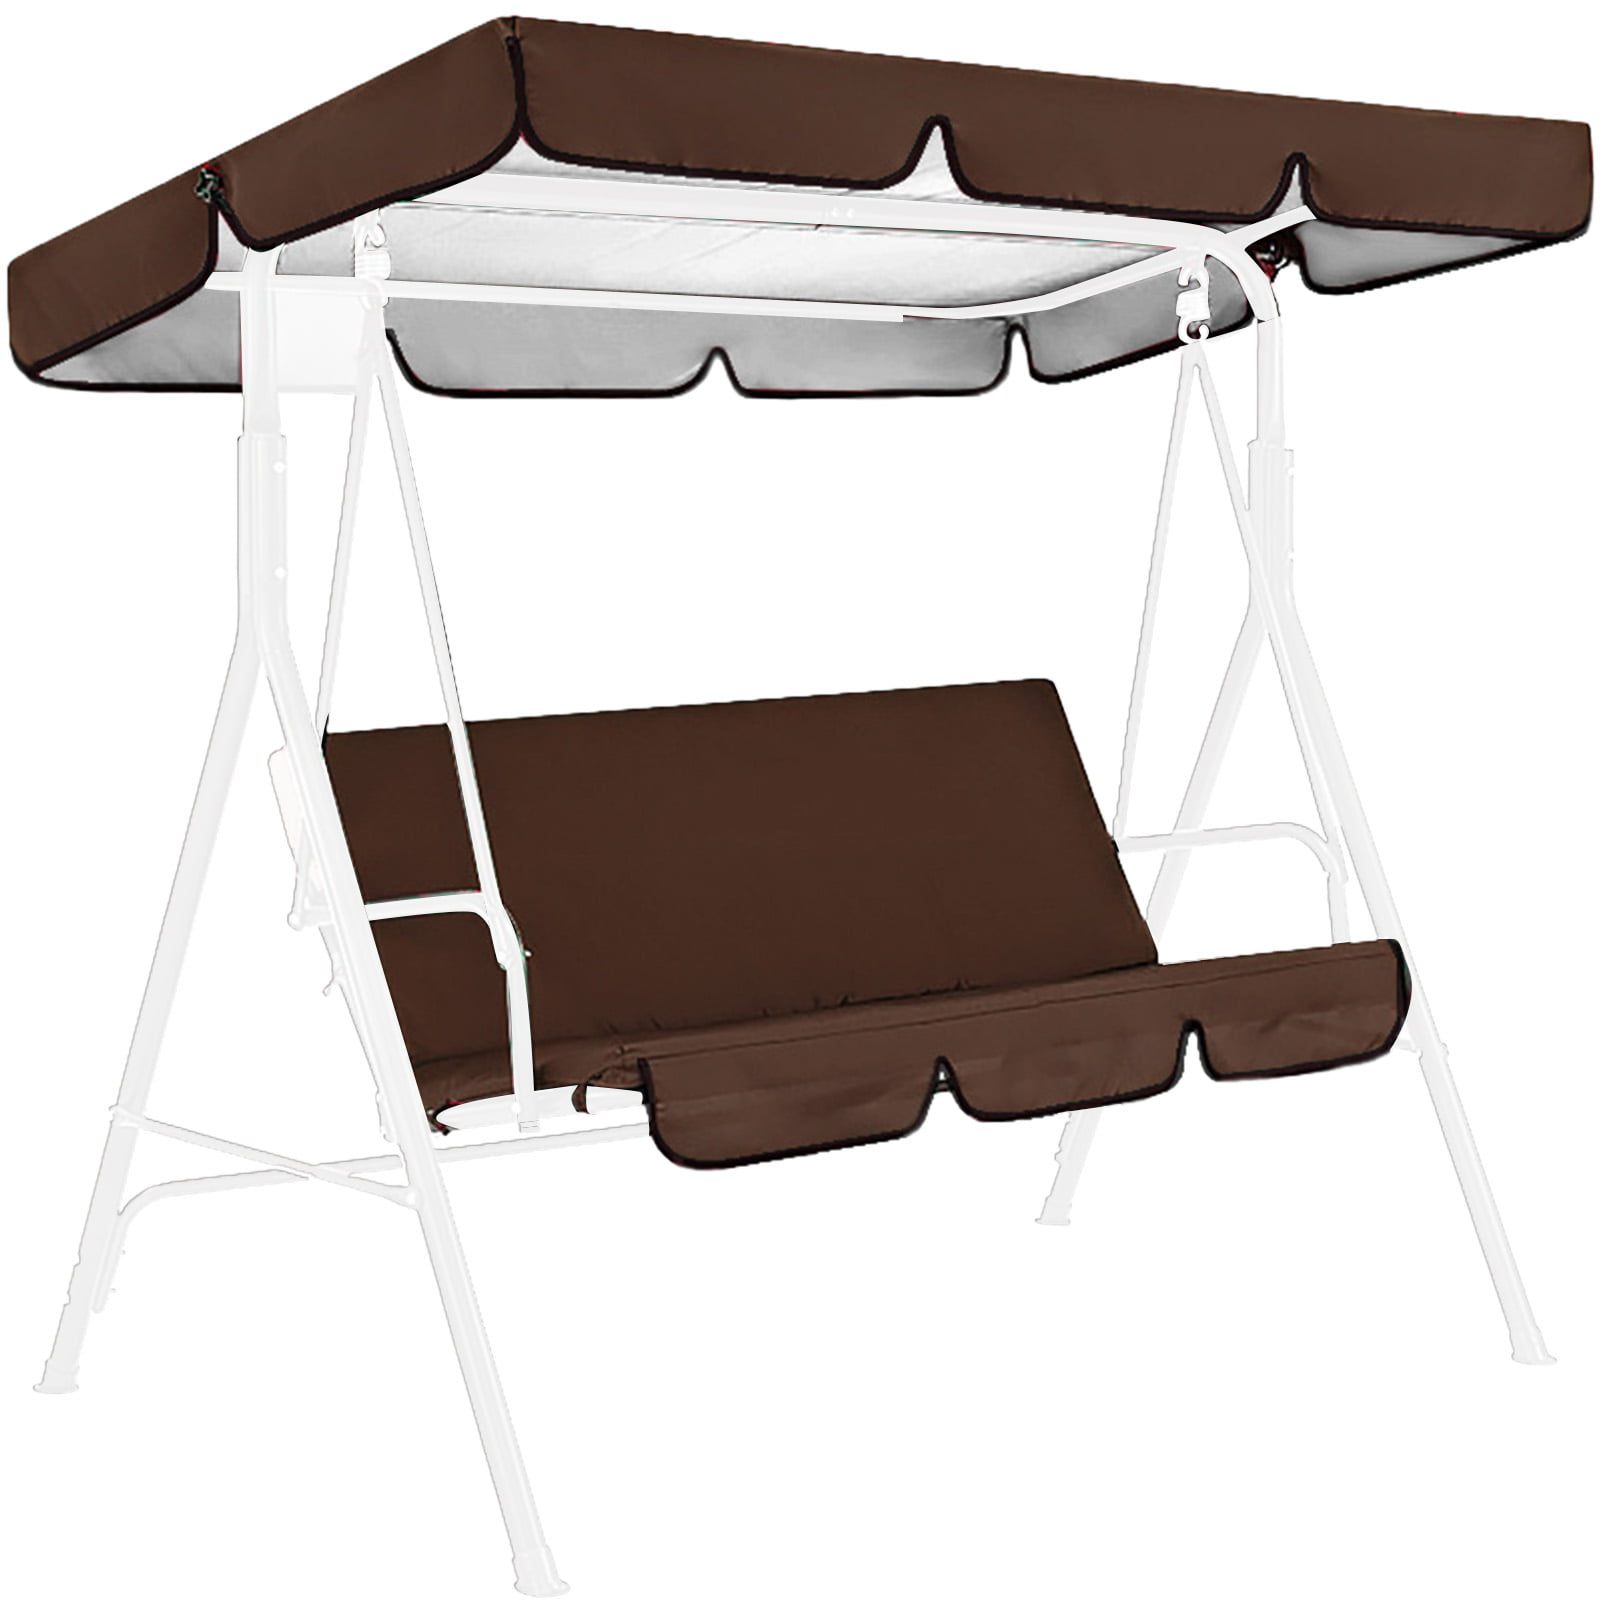 Details about   Swing Canopy for Patio home Hammock Furniture Porch Person 3 Seat Cover 210D 